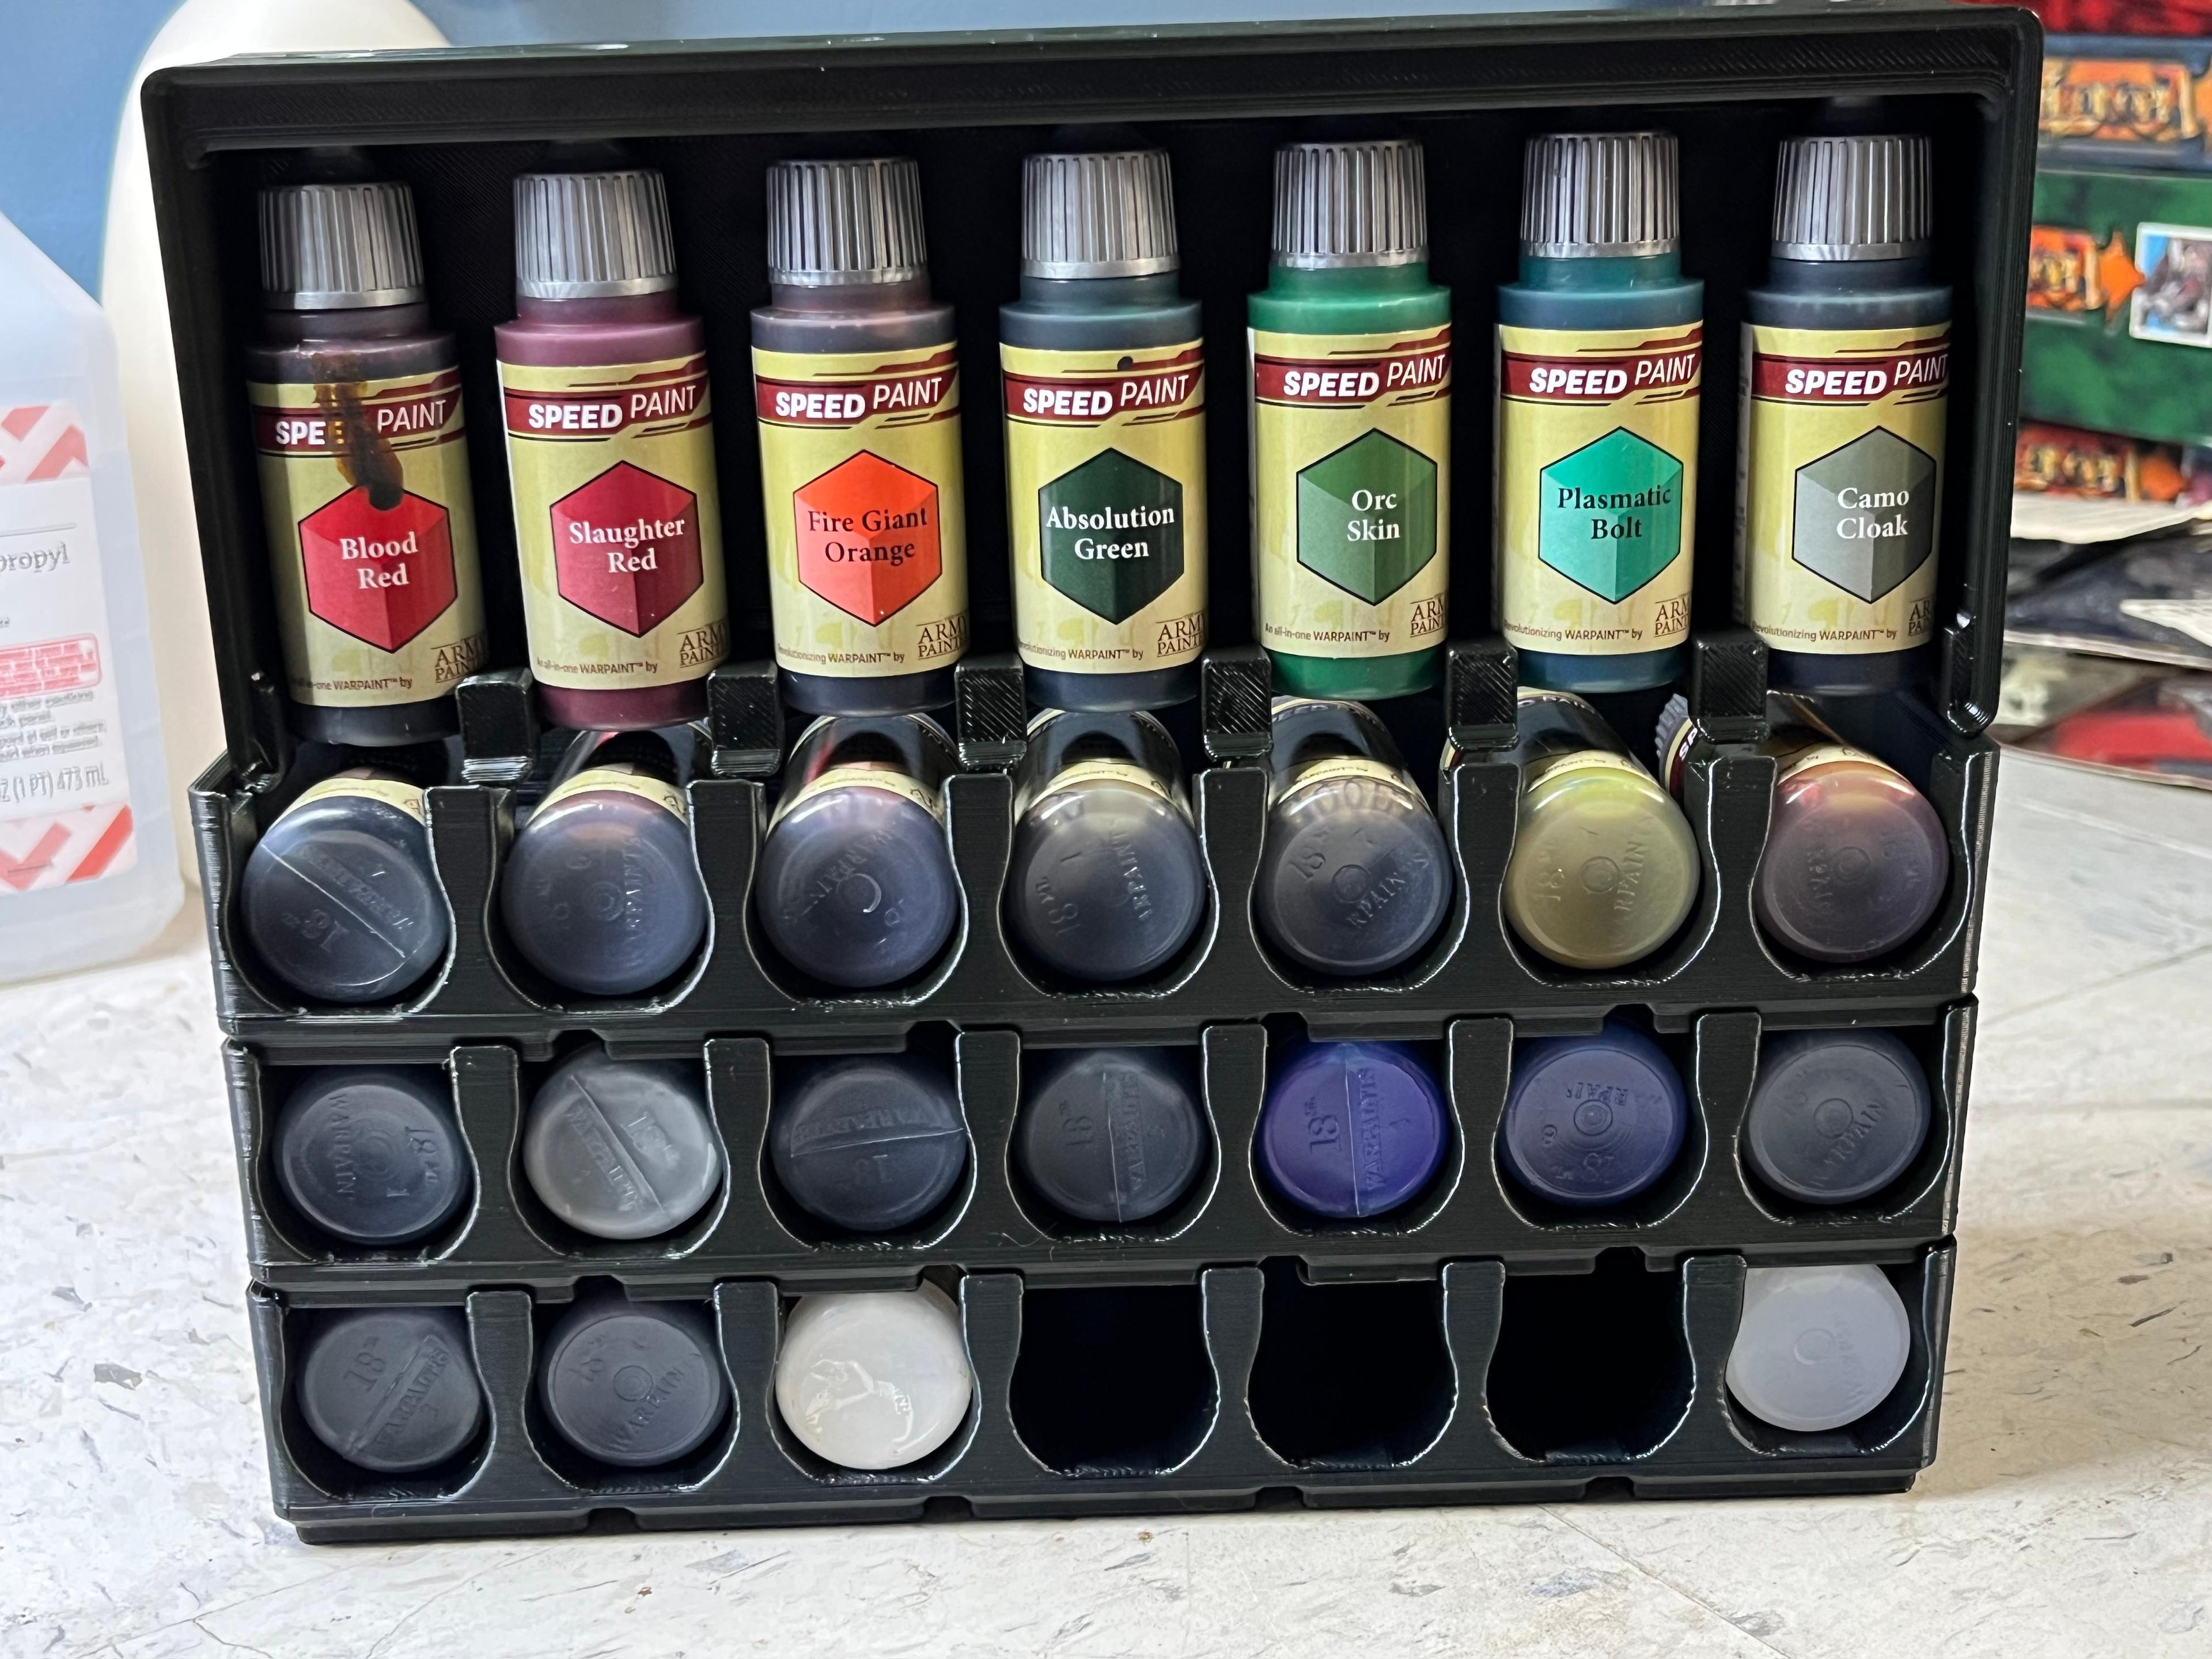 Gridfinity Dropper Paint Bottle Storage - Such a great solution!!!  Thanks for sharing!! - 3d model